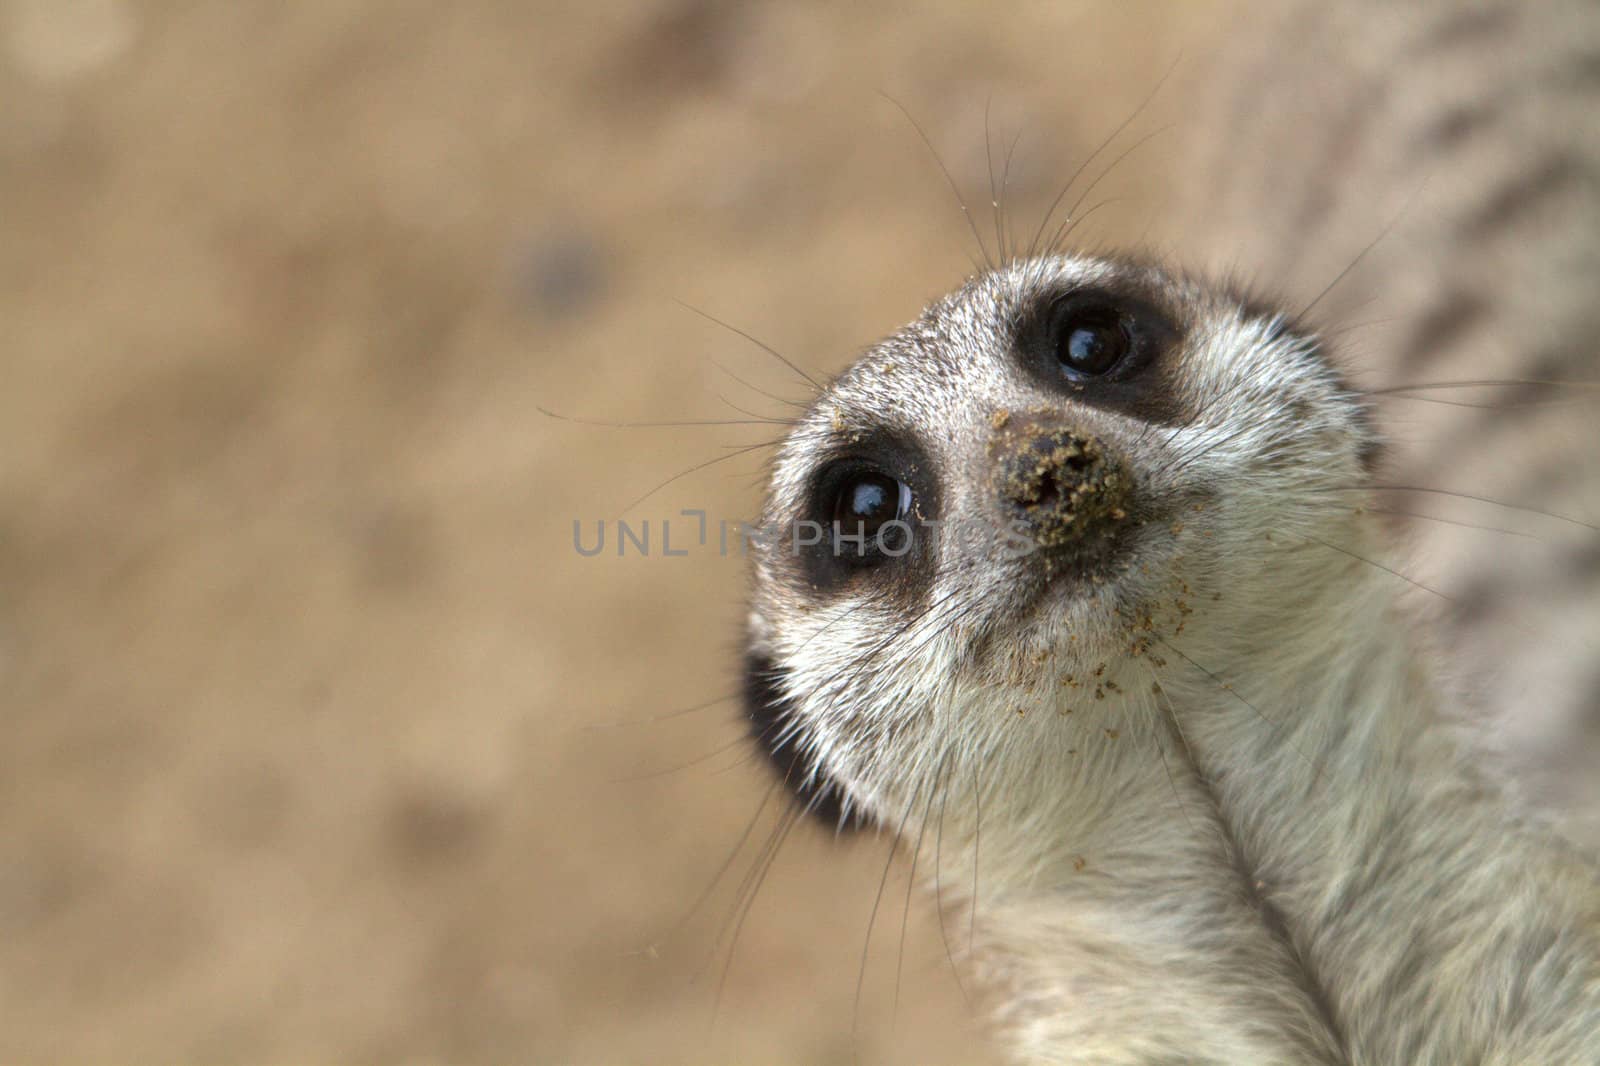 A single meerkat (suricate) standing in a zoo. The meerkat or suricate, Suricata suricatta, is a small mammal belonging to the mongoose family. Meerkats live in all parts of the Kalahari Desert in Botswana, in much of the Namib Desert in Namibia